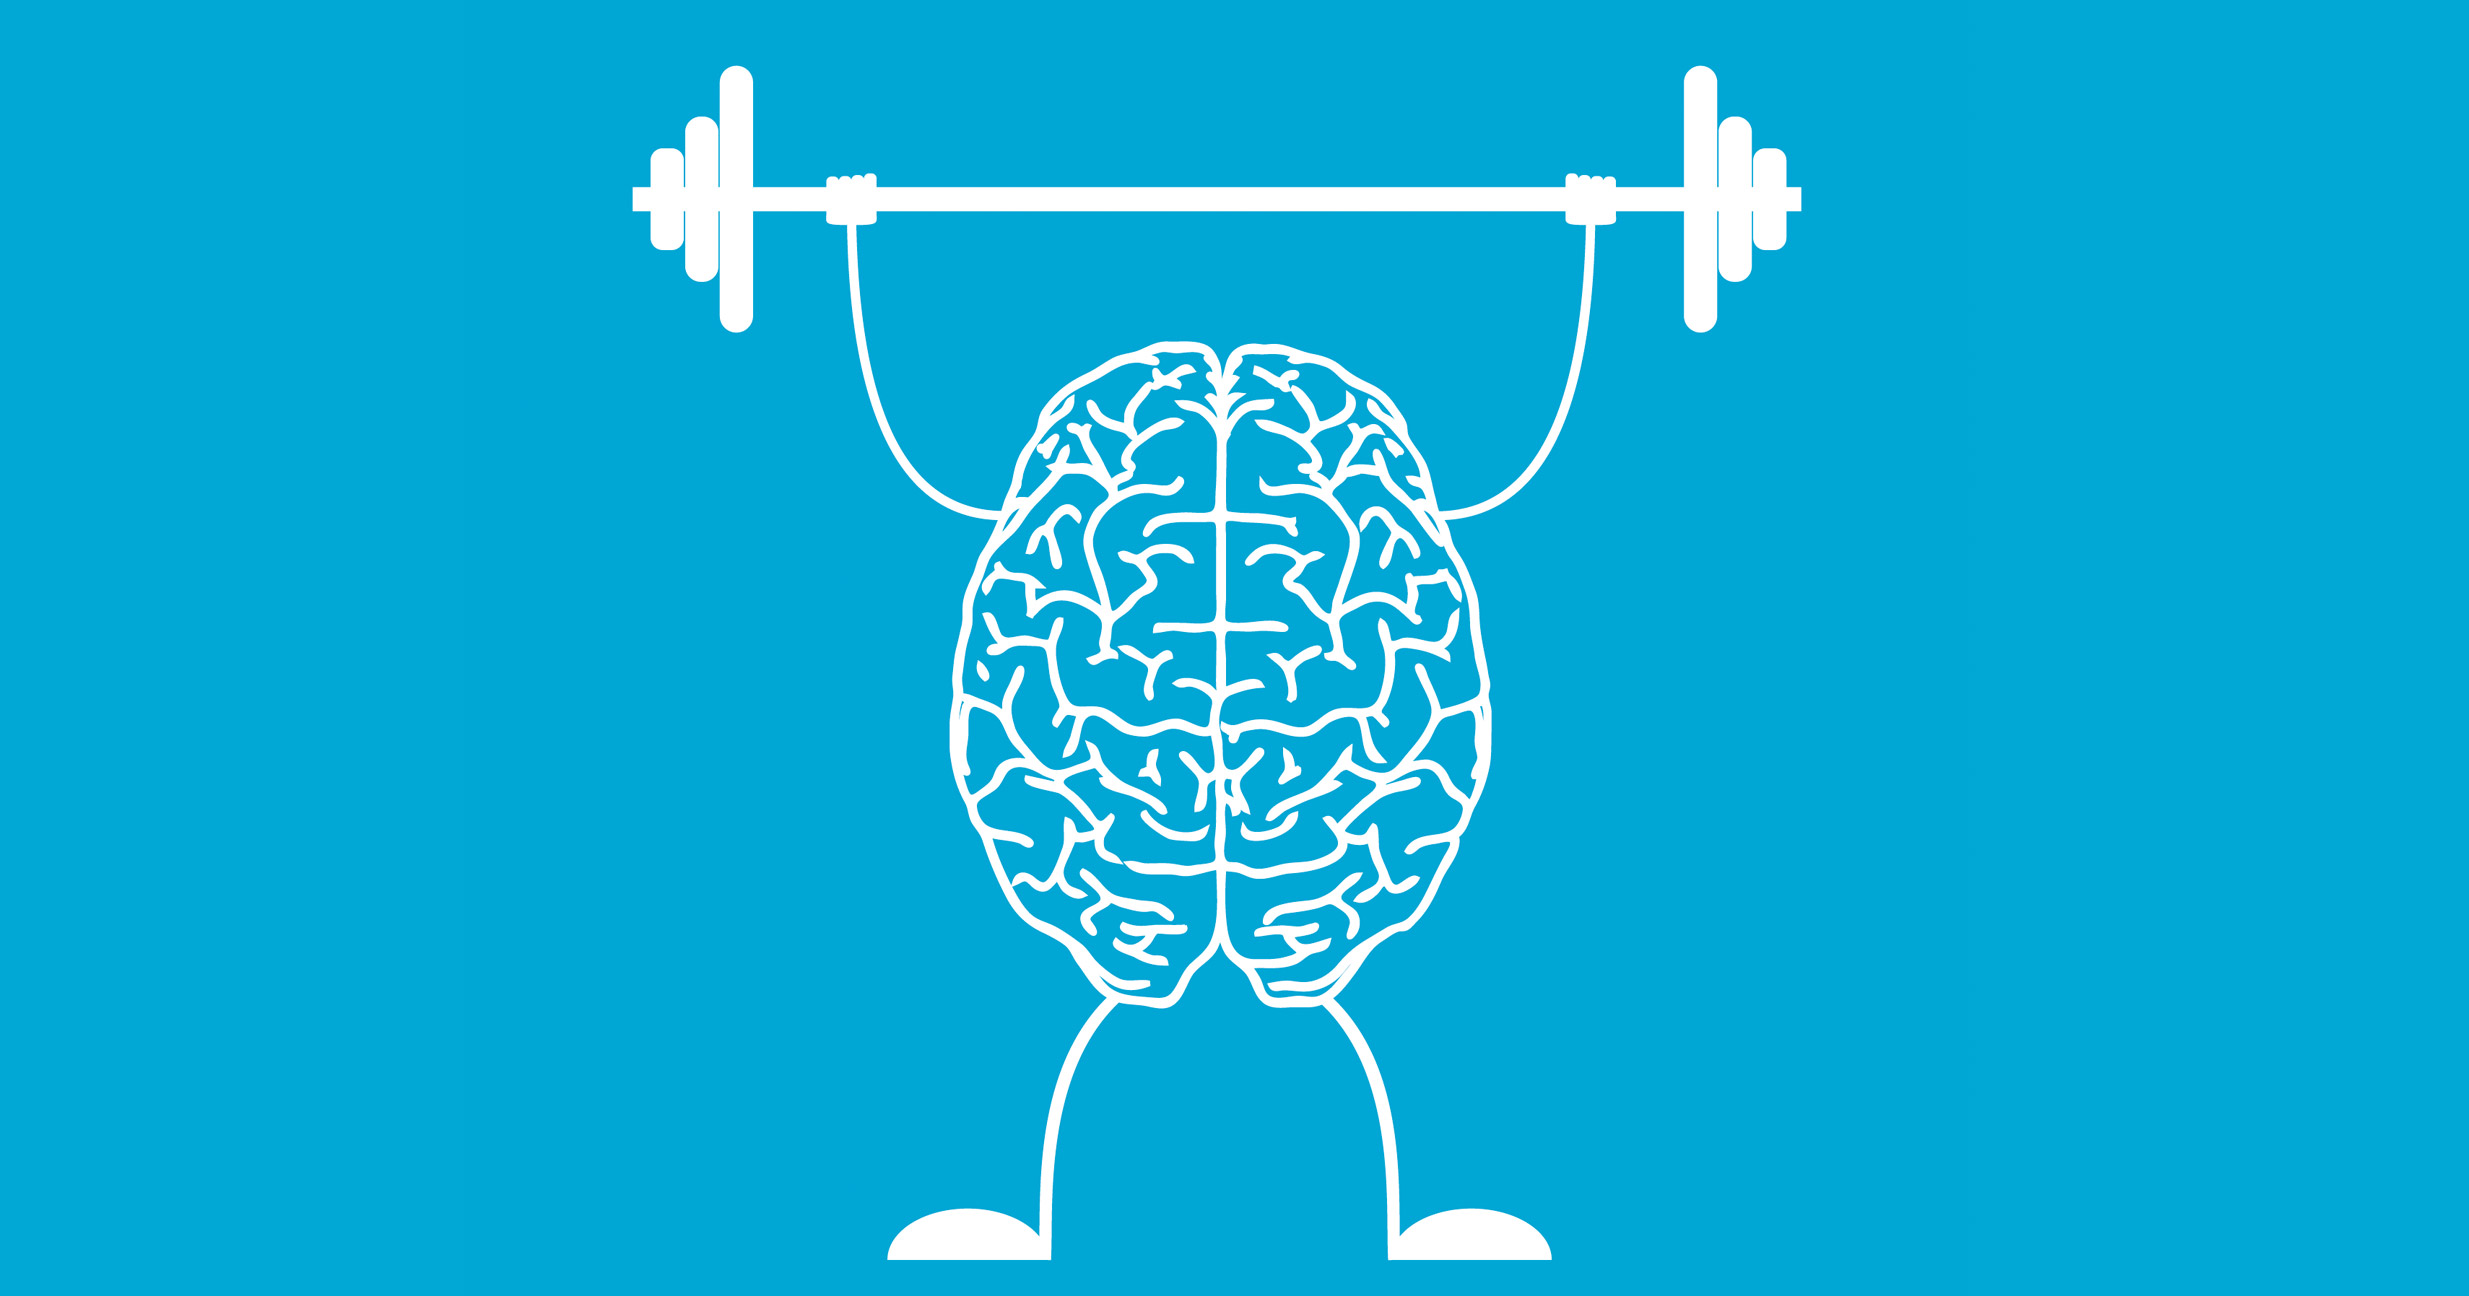 Graphic of a brain with arms and legs doing an overhead raise